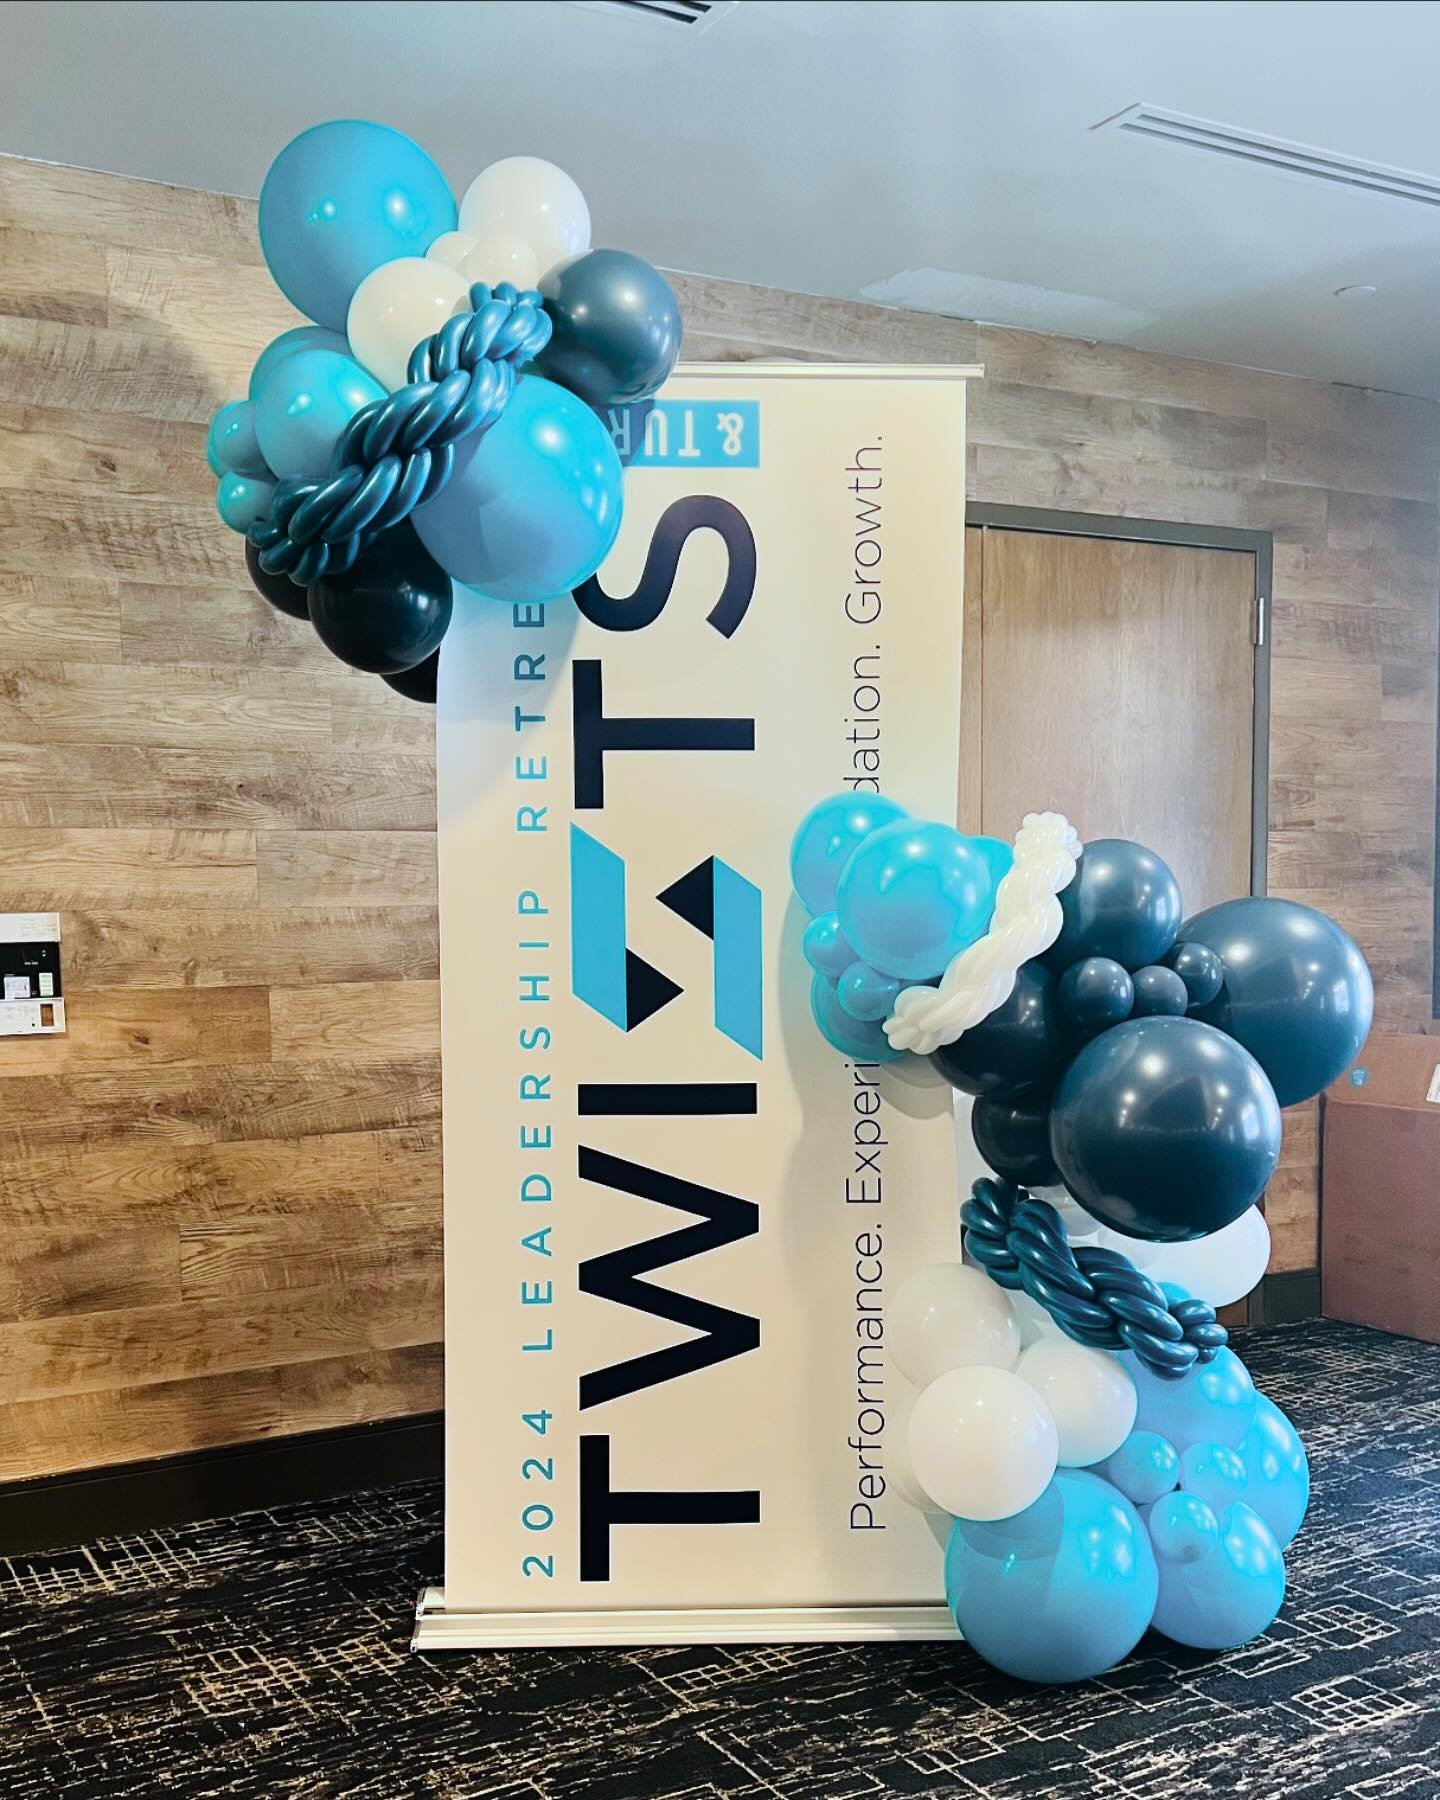 Life is full of twists and turns! 
.
.
.
. #balloontower #balloon #birthdayballoons #birthday🎂 #balloons #organic balloons #balloonprofessional #balloonmosaic ballooncolumn #balloonarrangement #balloonmarquee #obsessed #🎈 #vail #balloonstylist #org